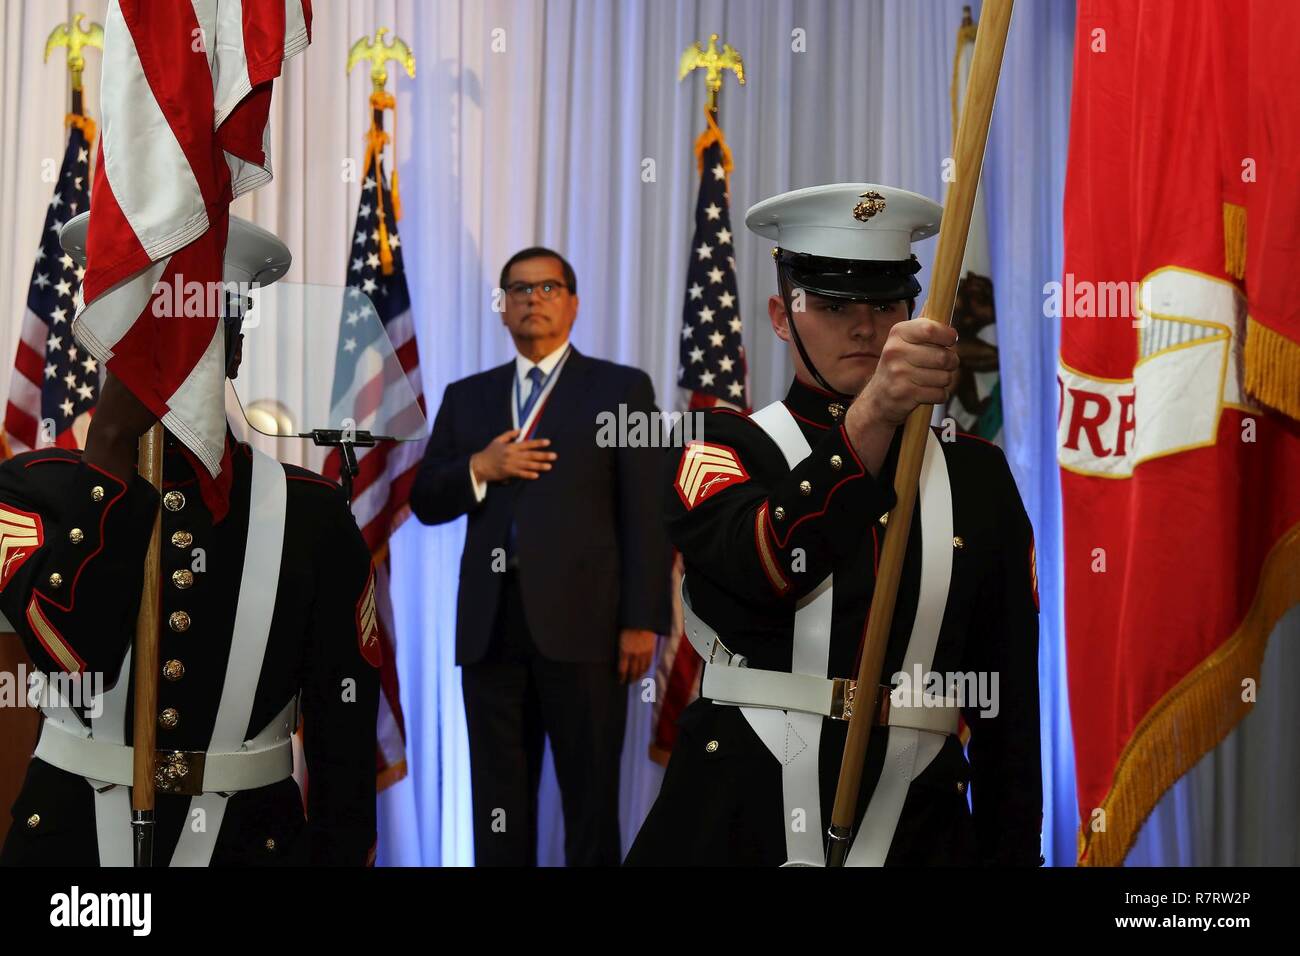 Marine Corps Sgt. Michael Thomas, right, recruiter of substation Costa  Mesa, lowers the Marine Corps flag during the Ellis Island Medal of Honor  Ceremony at the Westin South Coast Plaza, Costa Mesa,